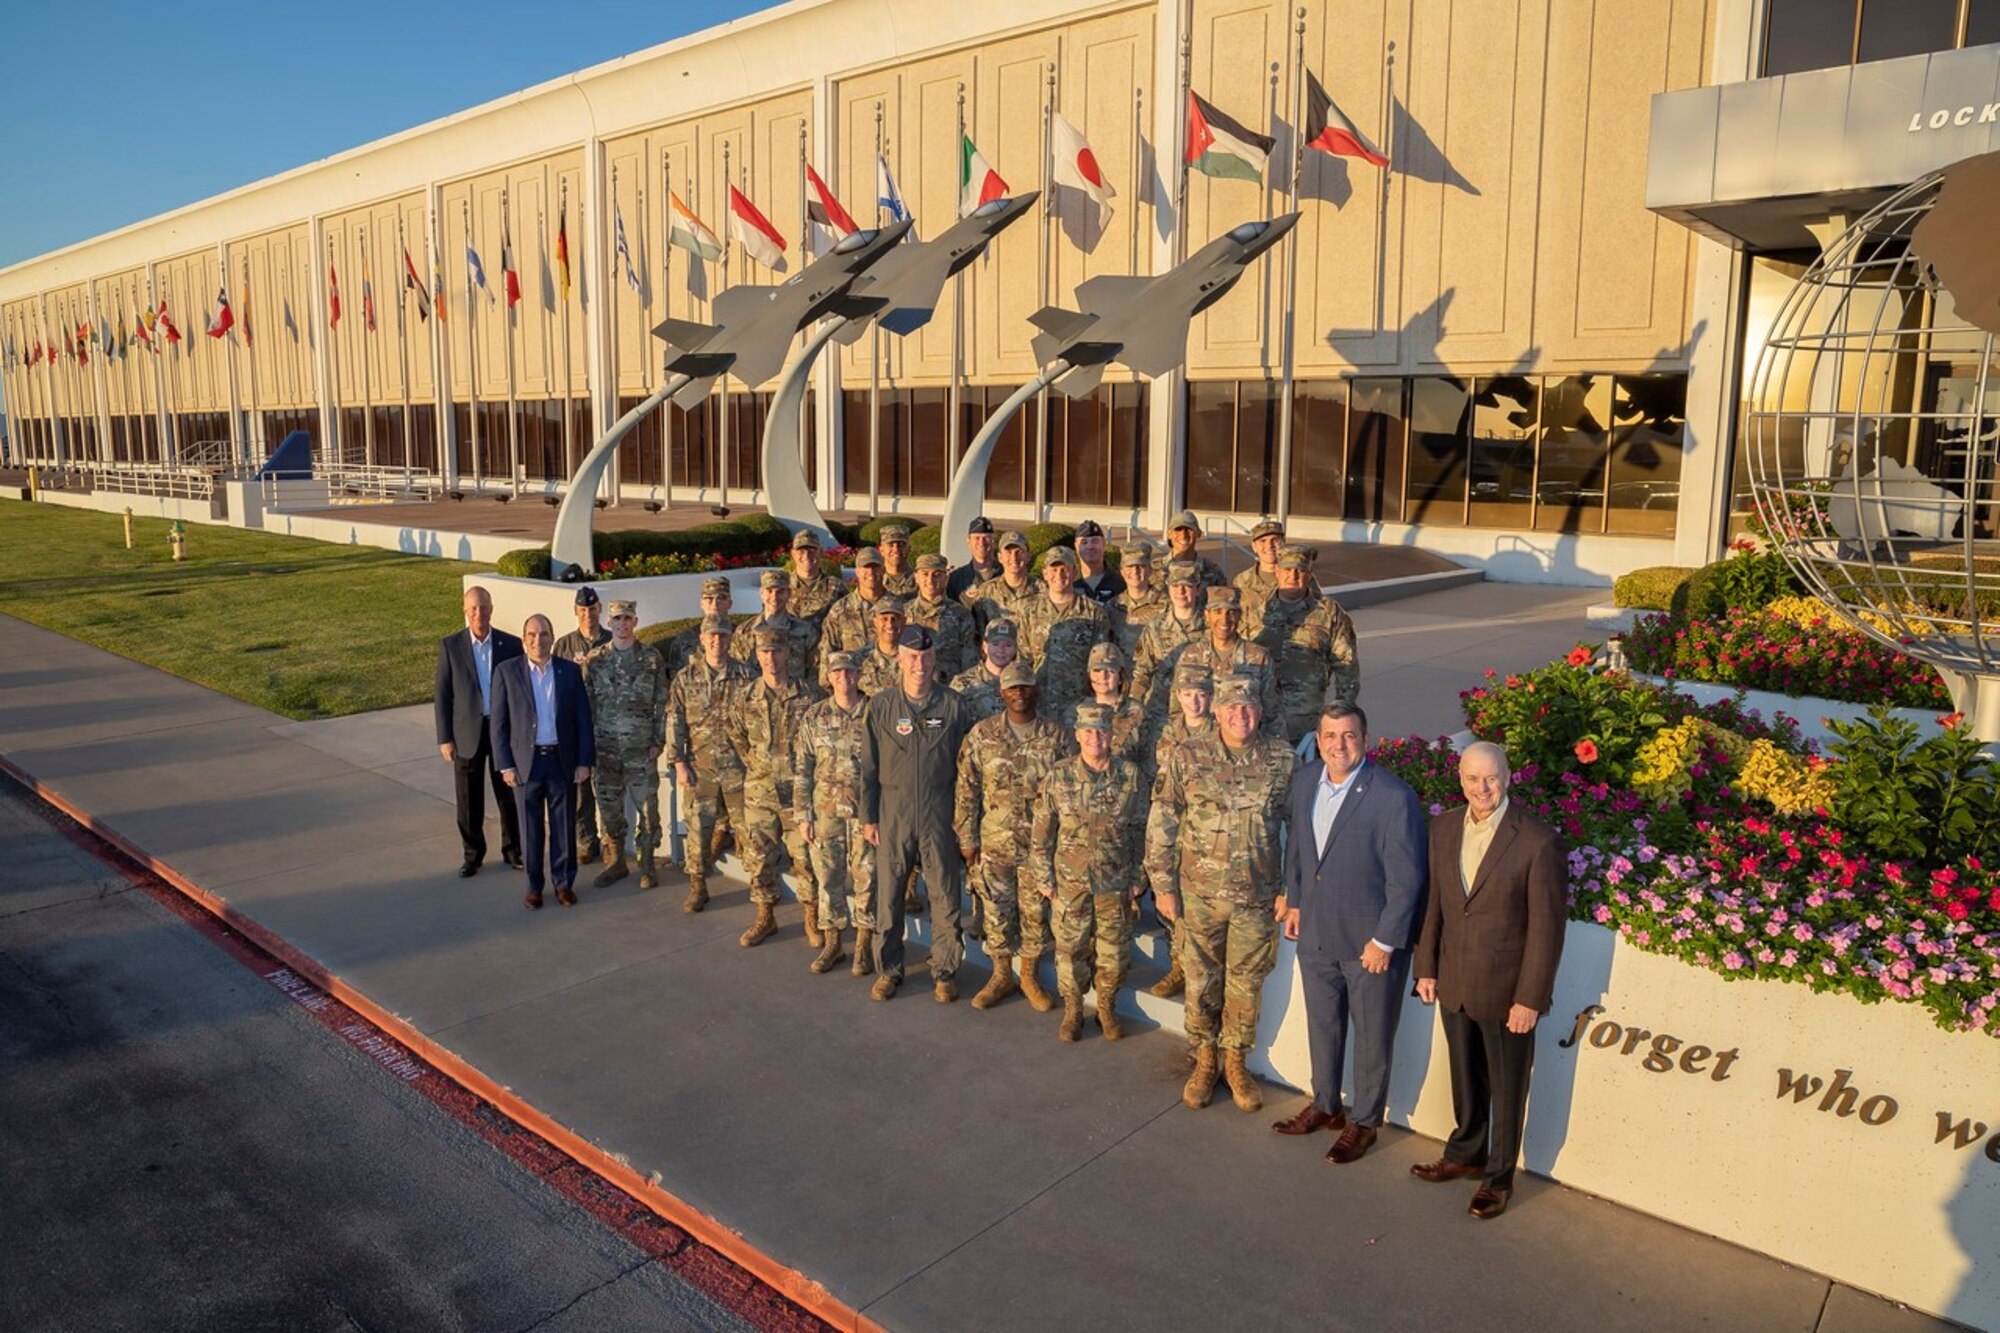 U.S. Airmen assigned to Tyndall Air Force Base, Florida, and members of the Lockheed Martin F-35 Lightning II team, pose for a photo outside the Lockheed Martin factory in Fort Worth, Texas, Oct. 20, 2022.